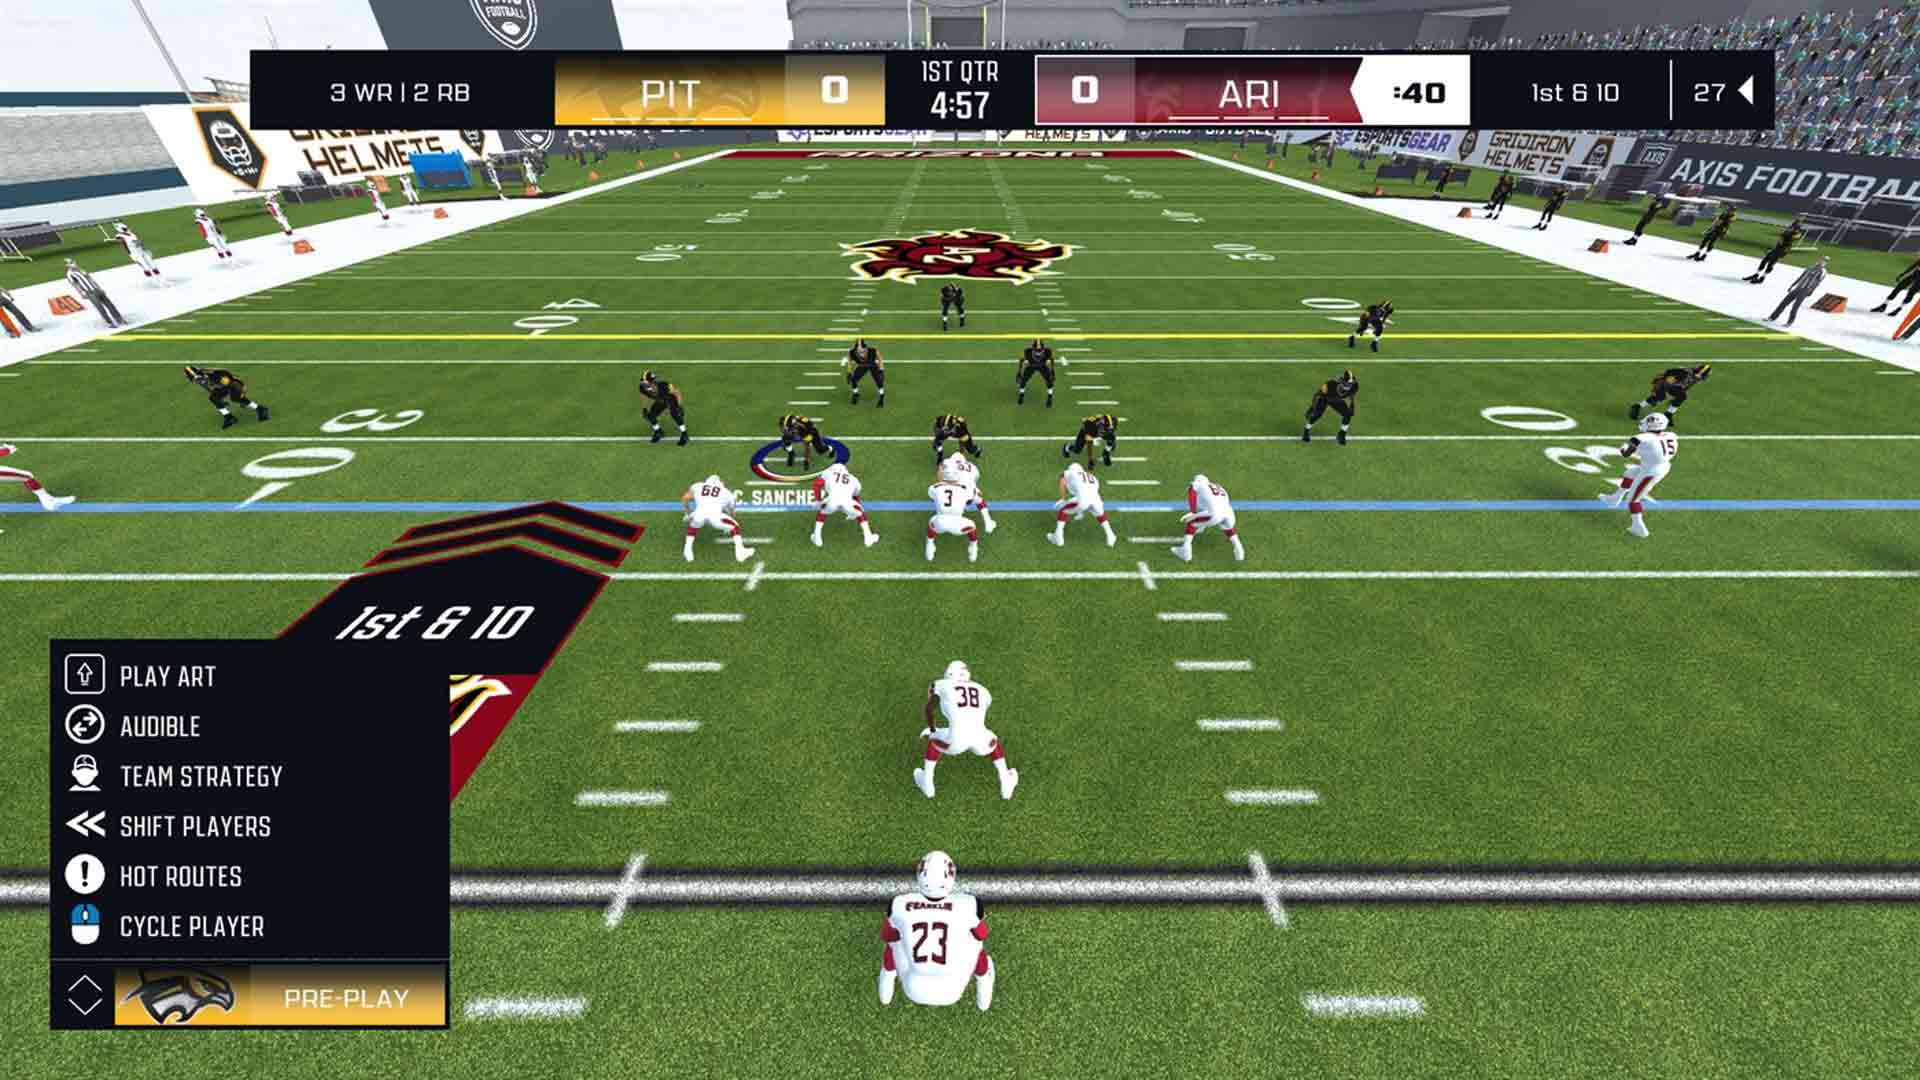 Axis Football 2020 Review Gamerheadquarters